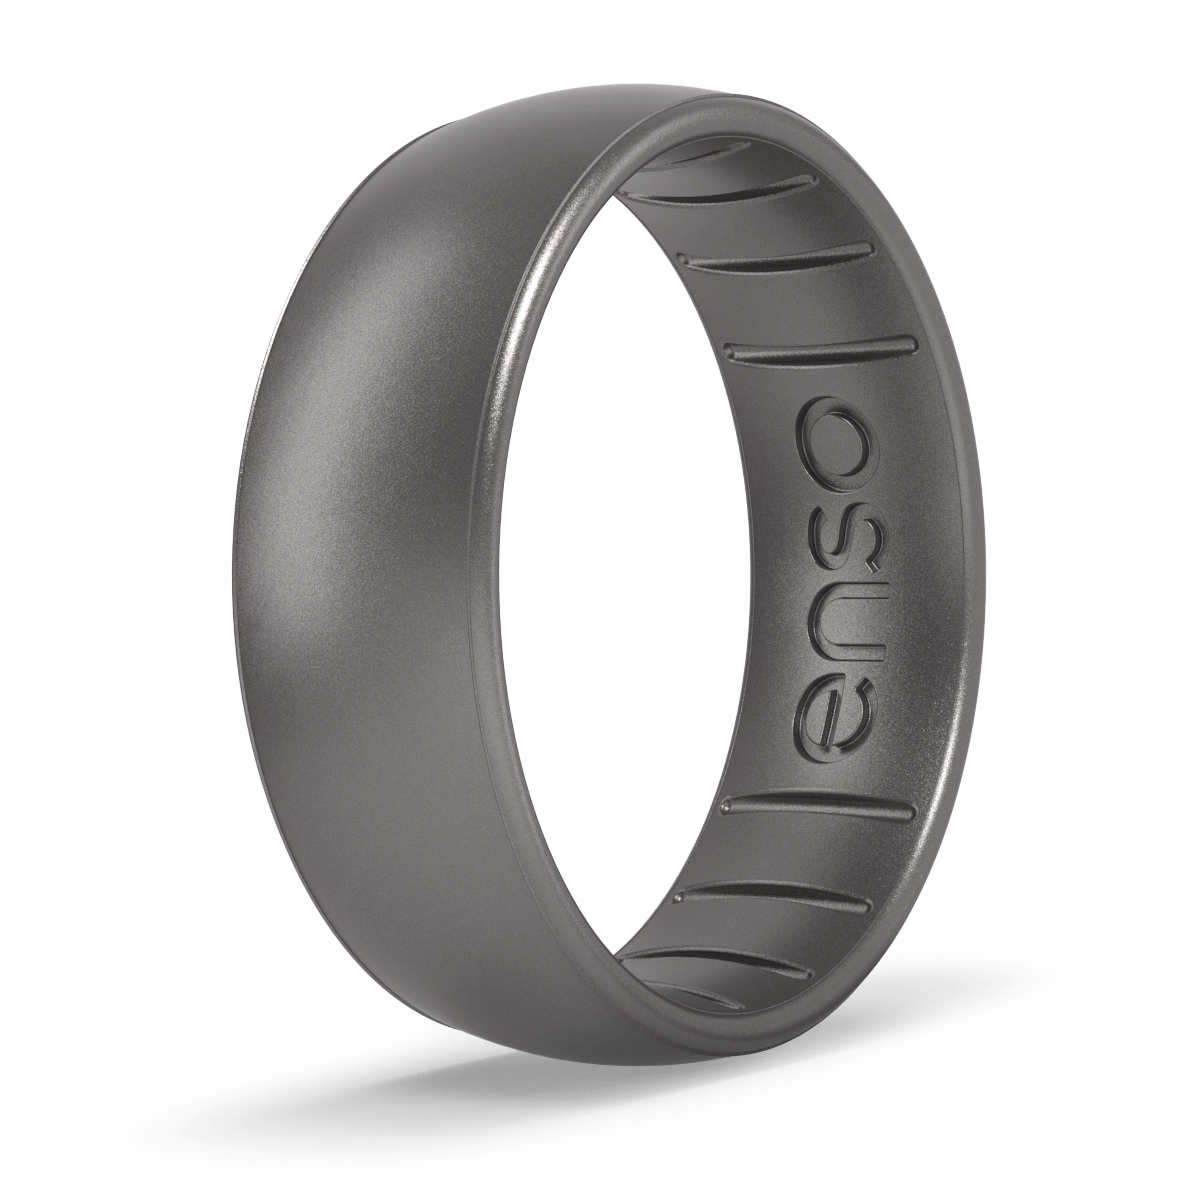 Enso Rings Classic Elements Series Silicone Ring - Rose Gold - 10